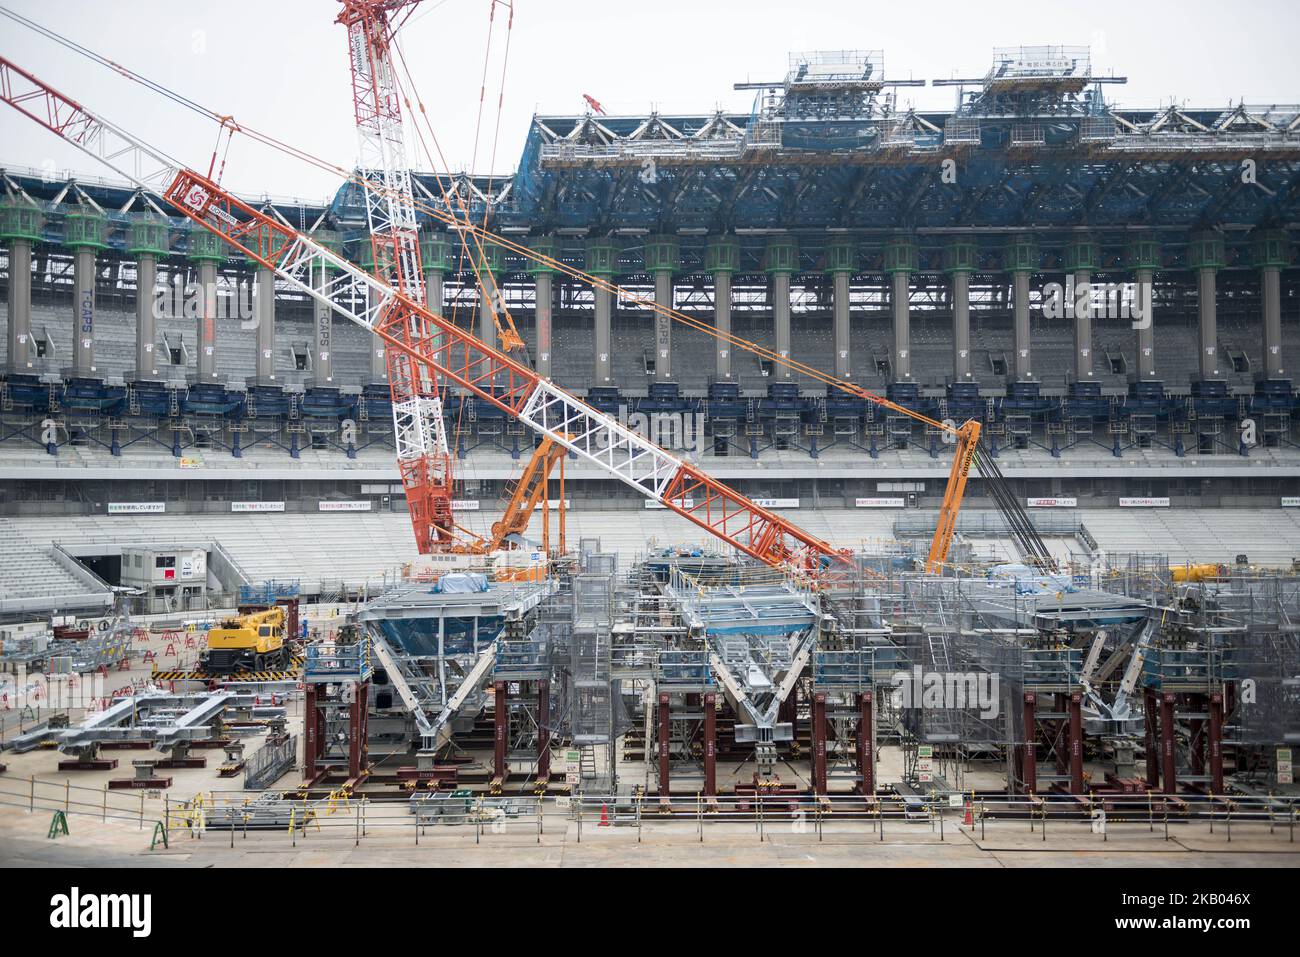 A general view during the Tokyo 2020 Olympic new National Stadium construction media tour on July 18, 2018 in Tokyo, Japan. The current tempature inside the stadium as 38.1 degrees celsius. 2020 Tokyo Olympics and Paralympics will be the first Olympic Games in Japan in 56 years since 1964. Opening and Closing ceremony will be held at this stadium. (Photo by Alessandro Di Ciommo/NurPhoto) Stock Photo